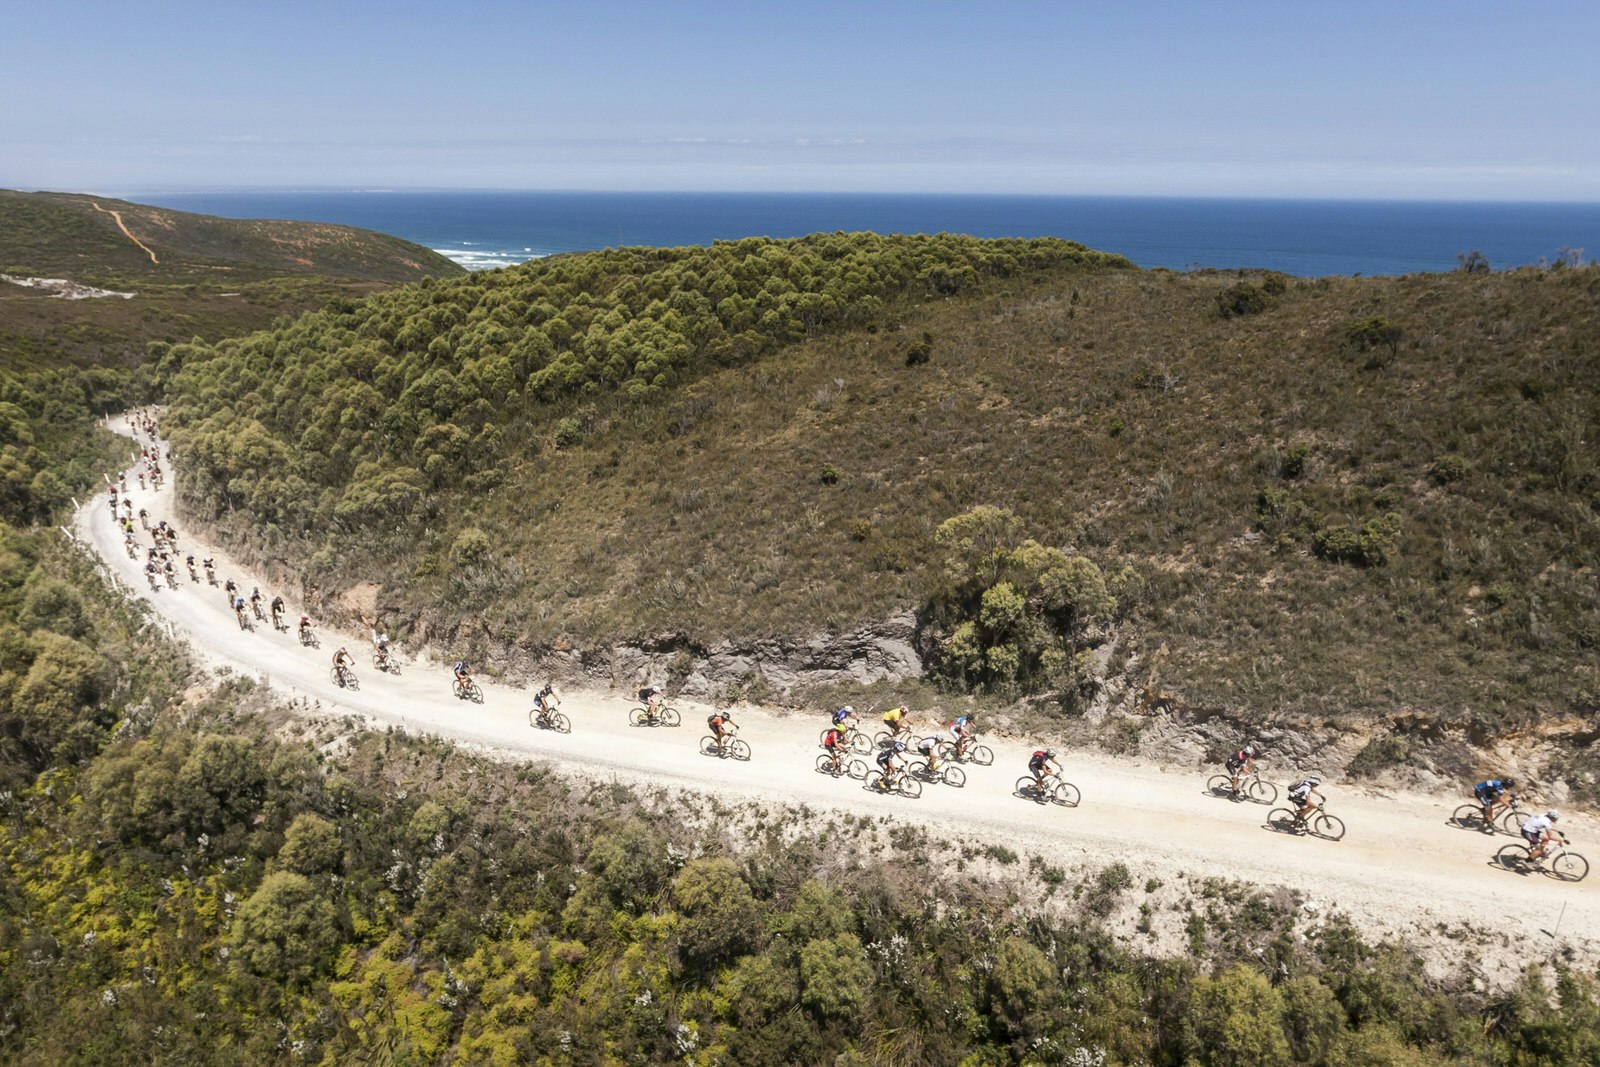 A group of some 100 mountain bikers wind up a twisting gravel road that cuts along the slope of a forest hill; the ocean sits in the distance.